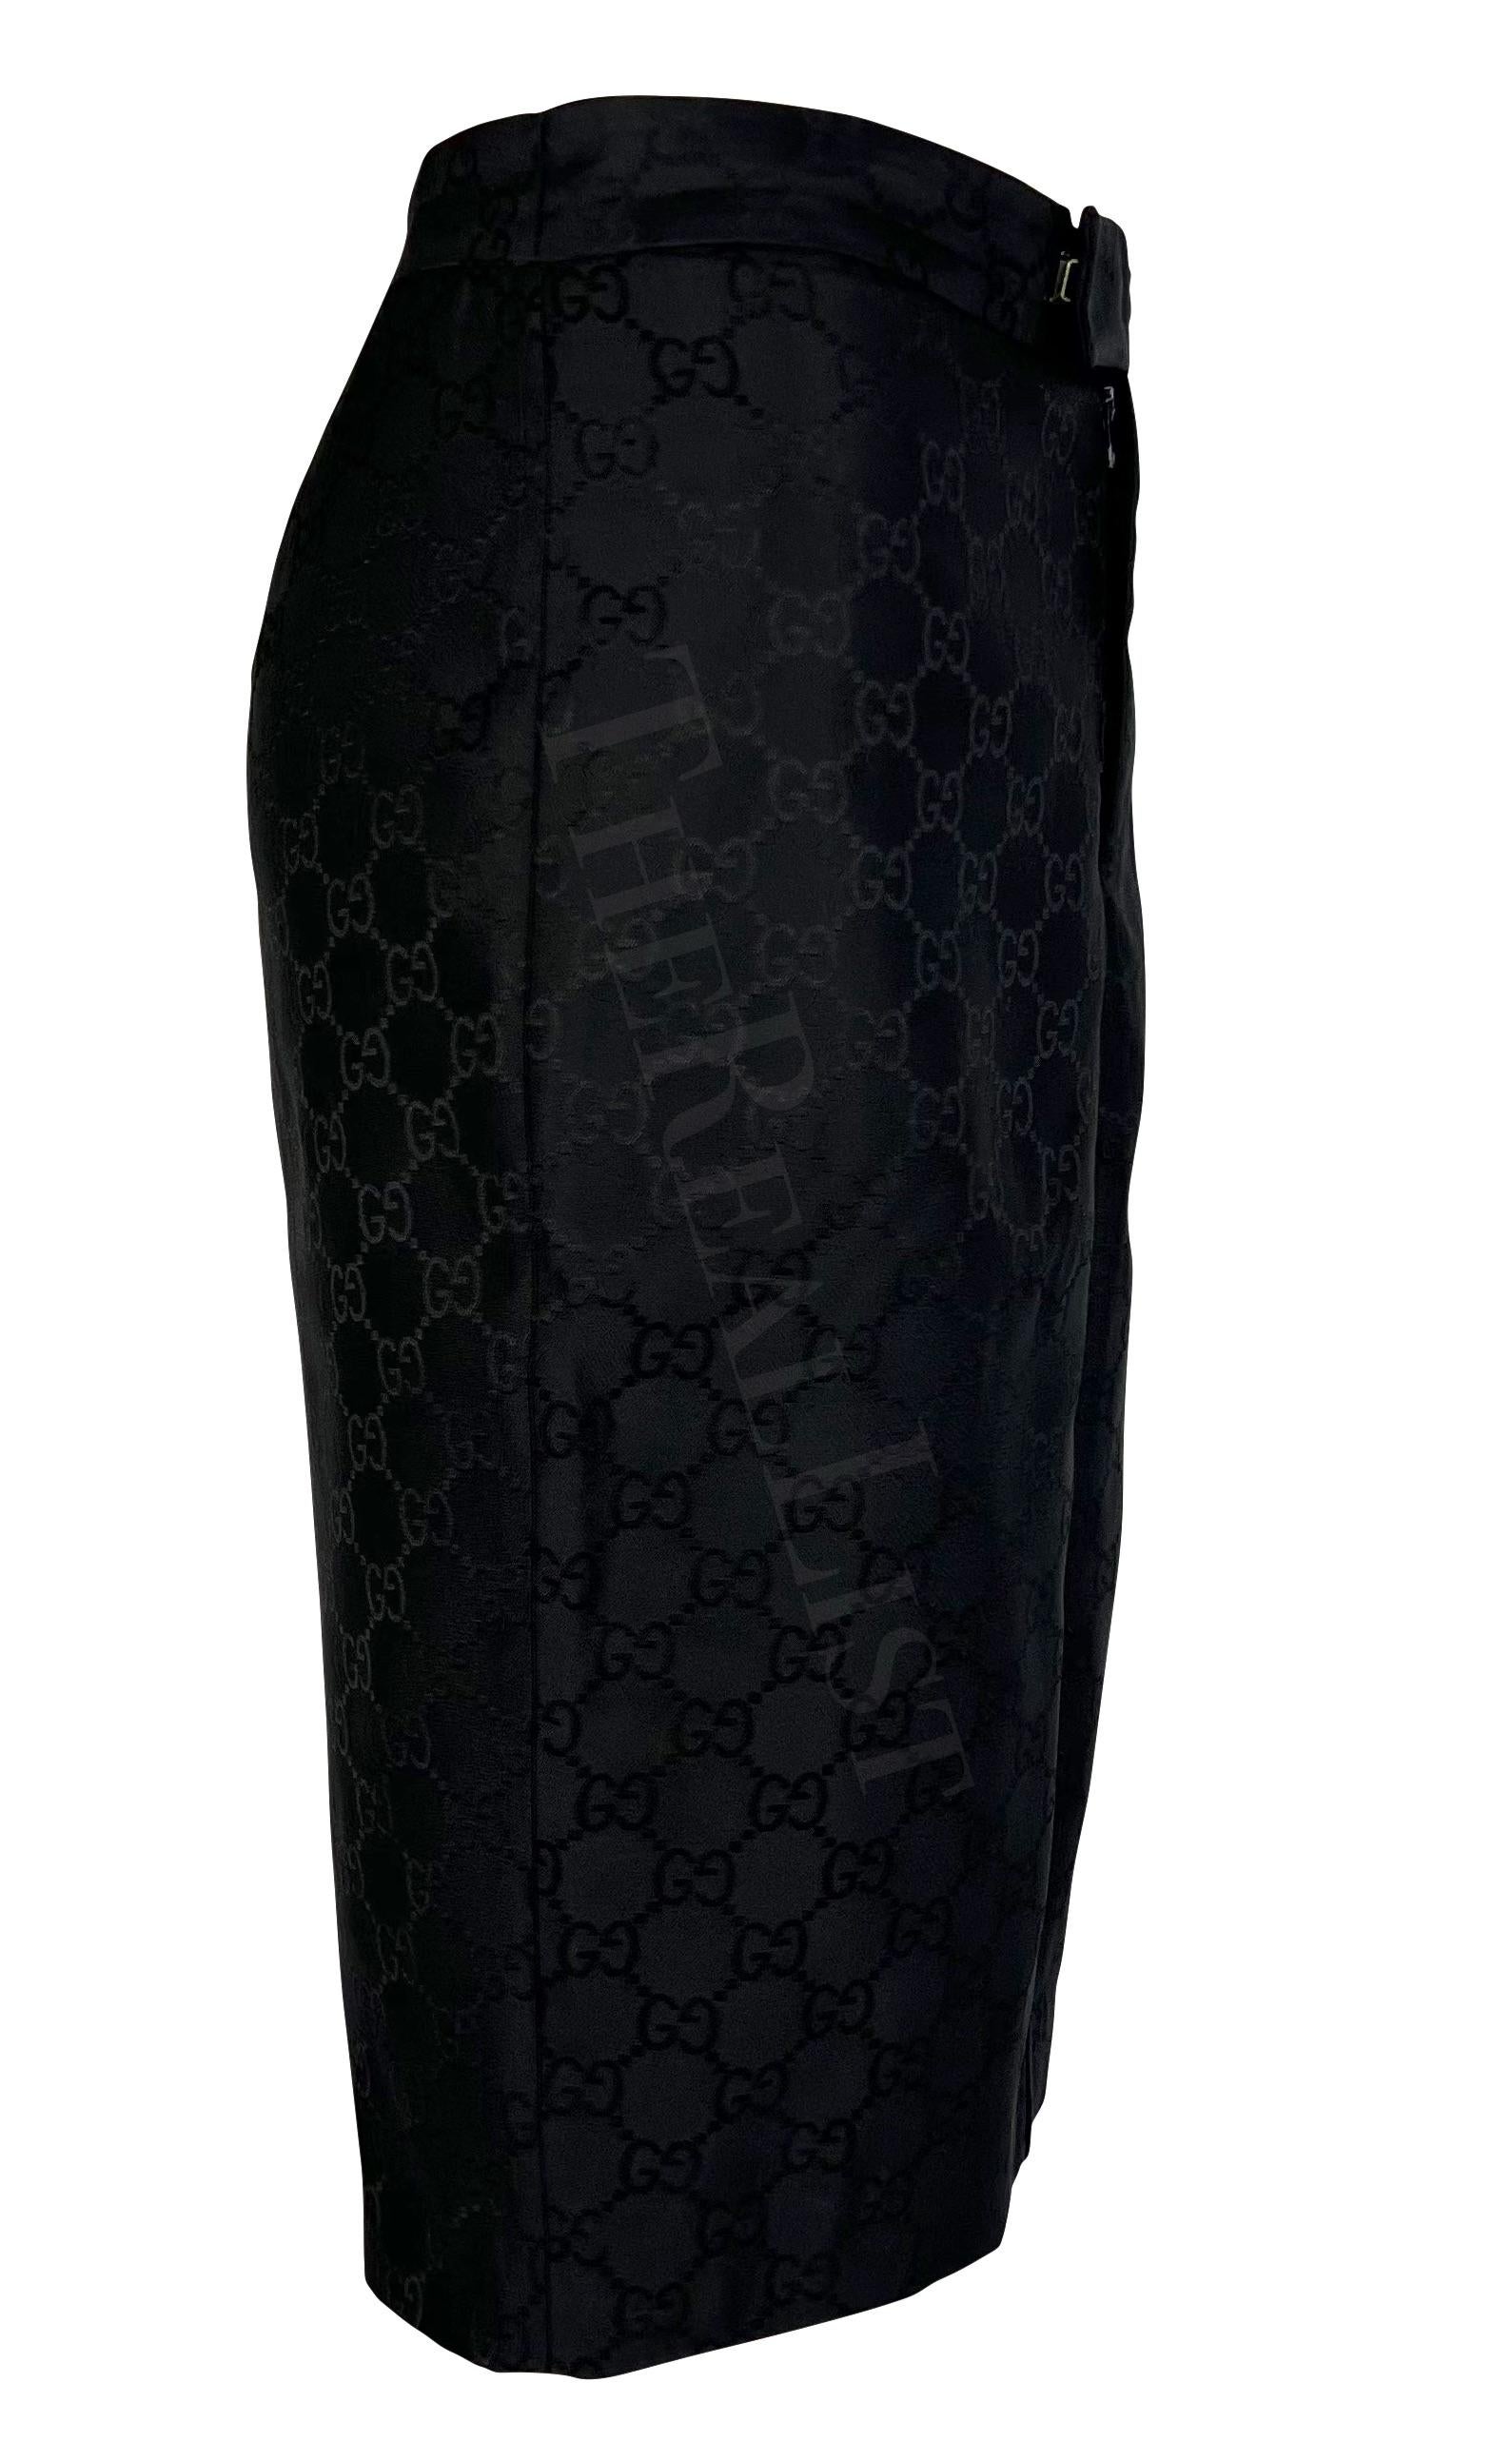 S/S 1998 Gucci by Tom Ford Black 'GG' Monogram Runway Skirt For Sale 2